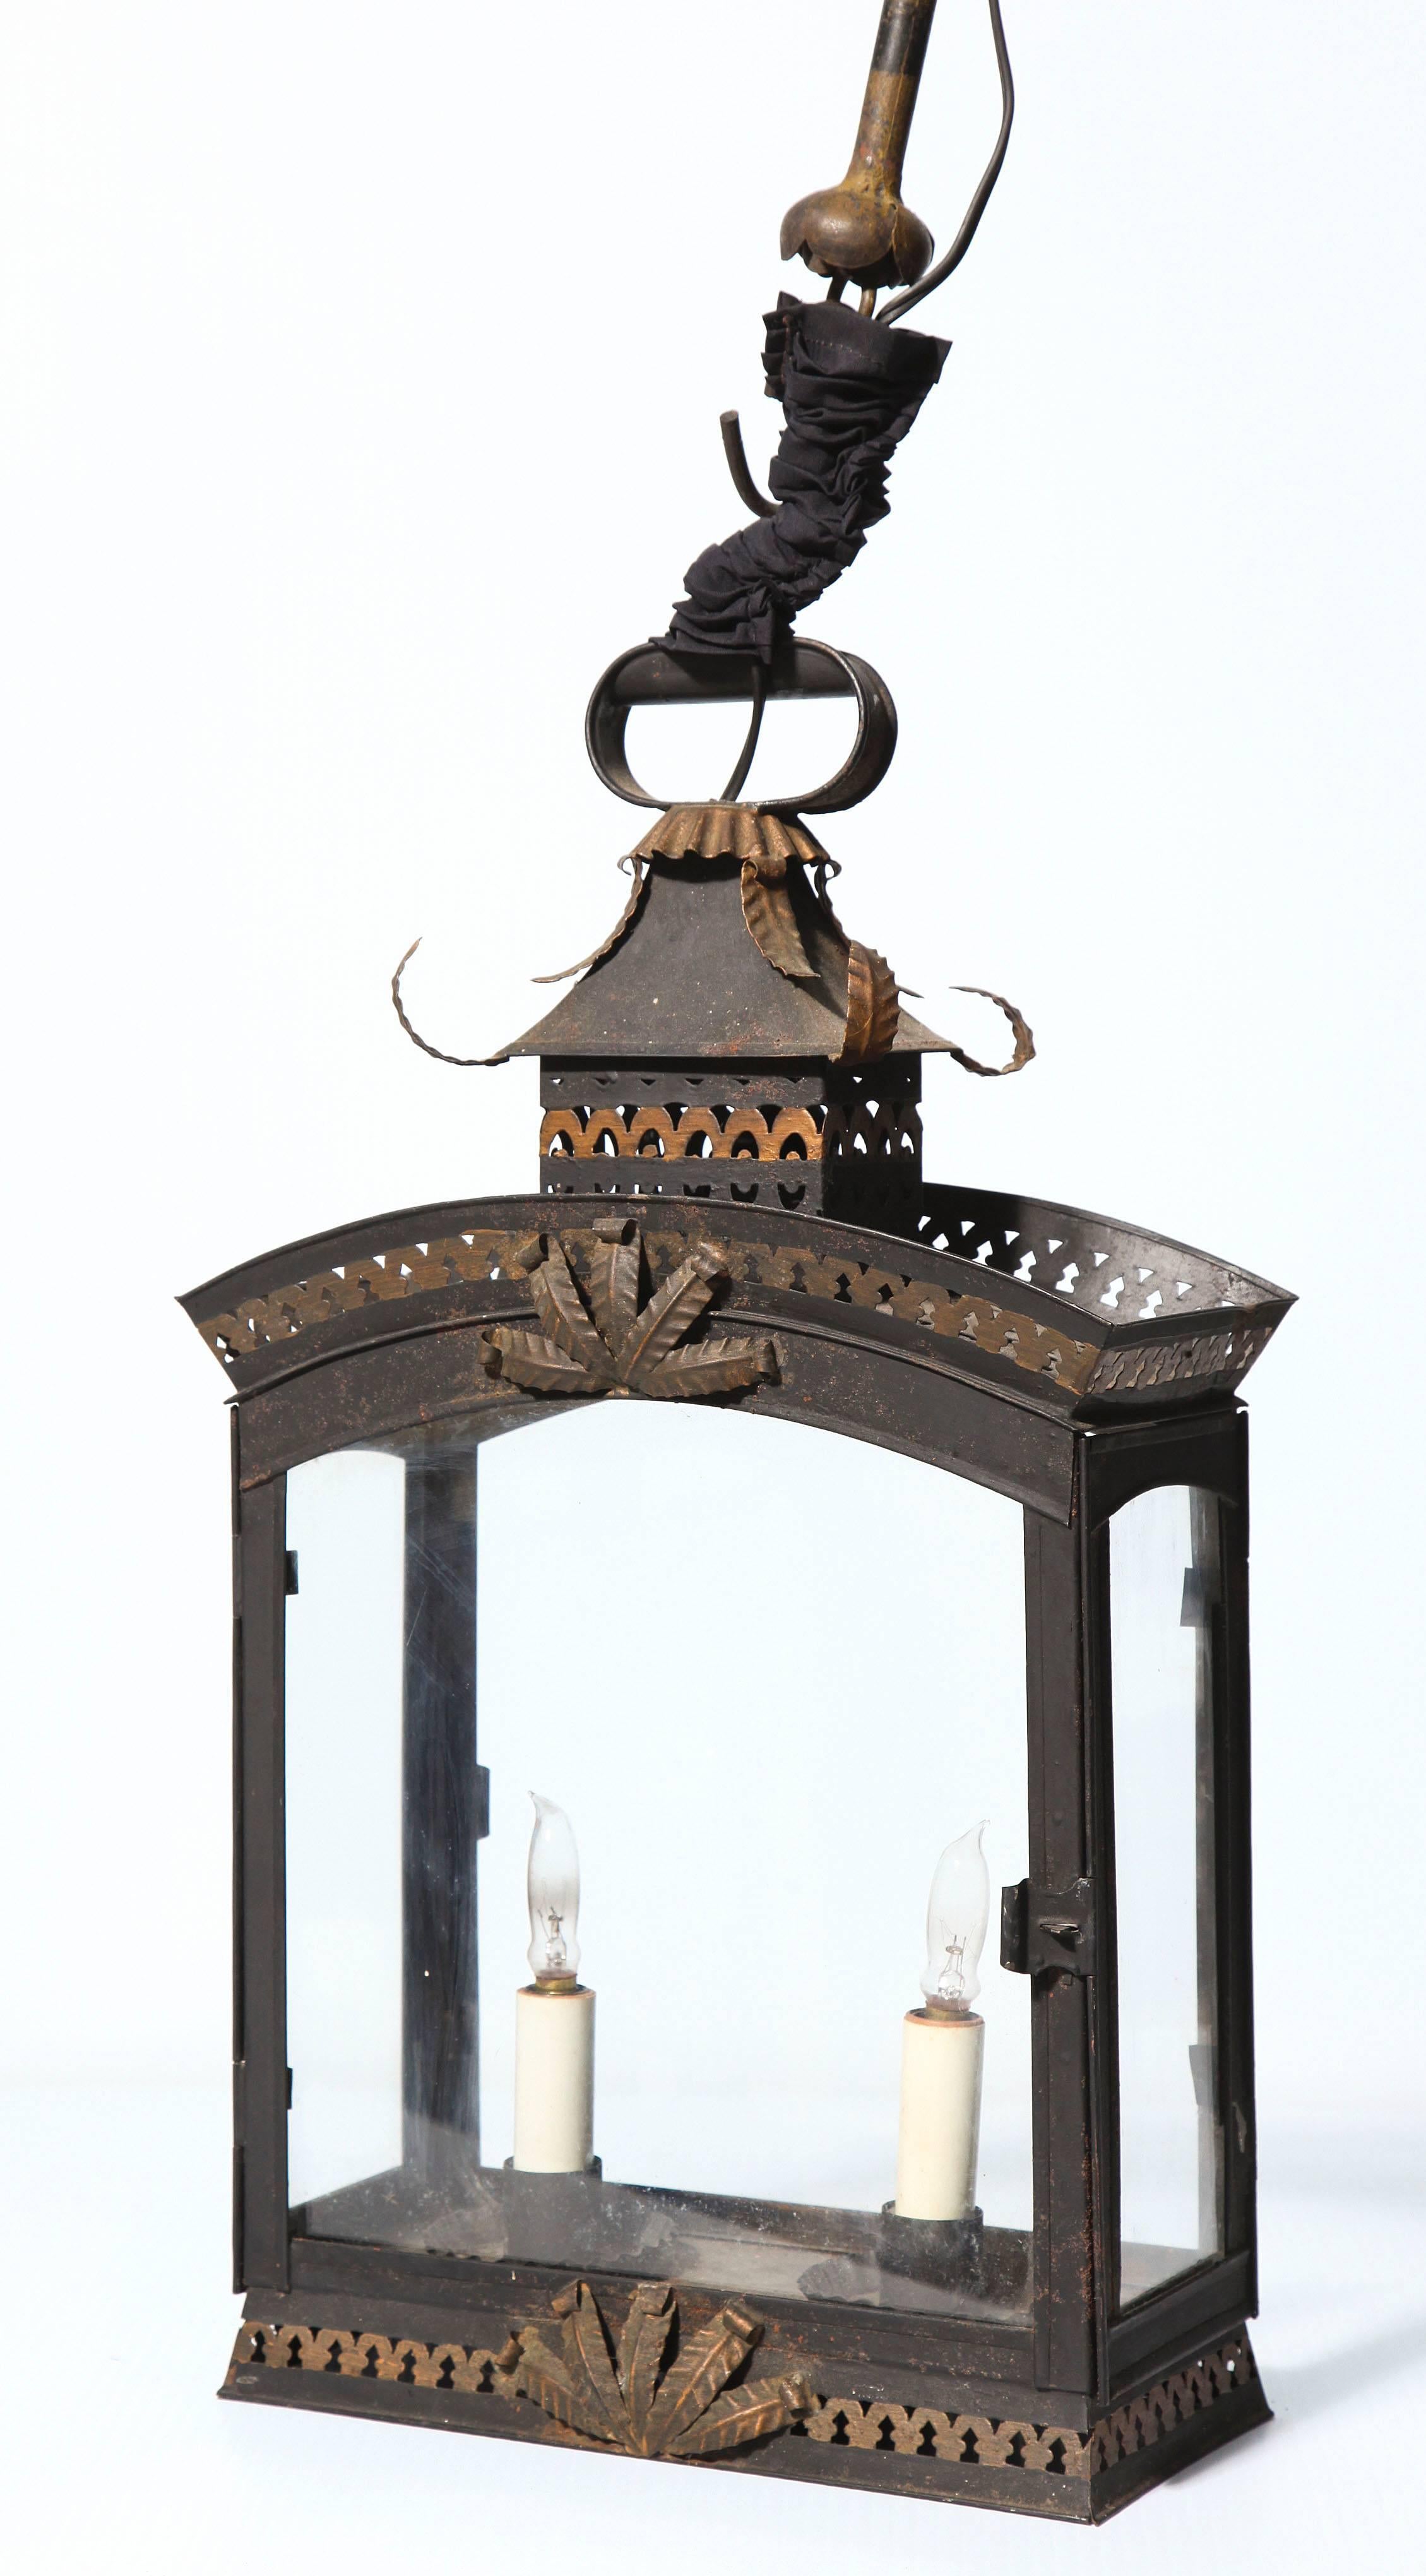 Gilt Charming Two-Light Tole Painted and Gilded Lantern